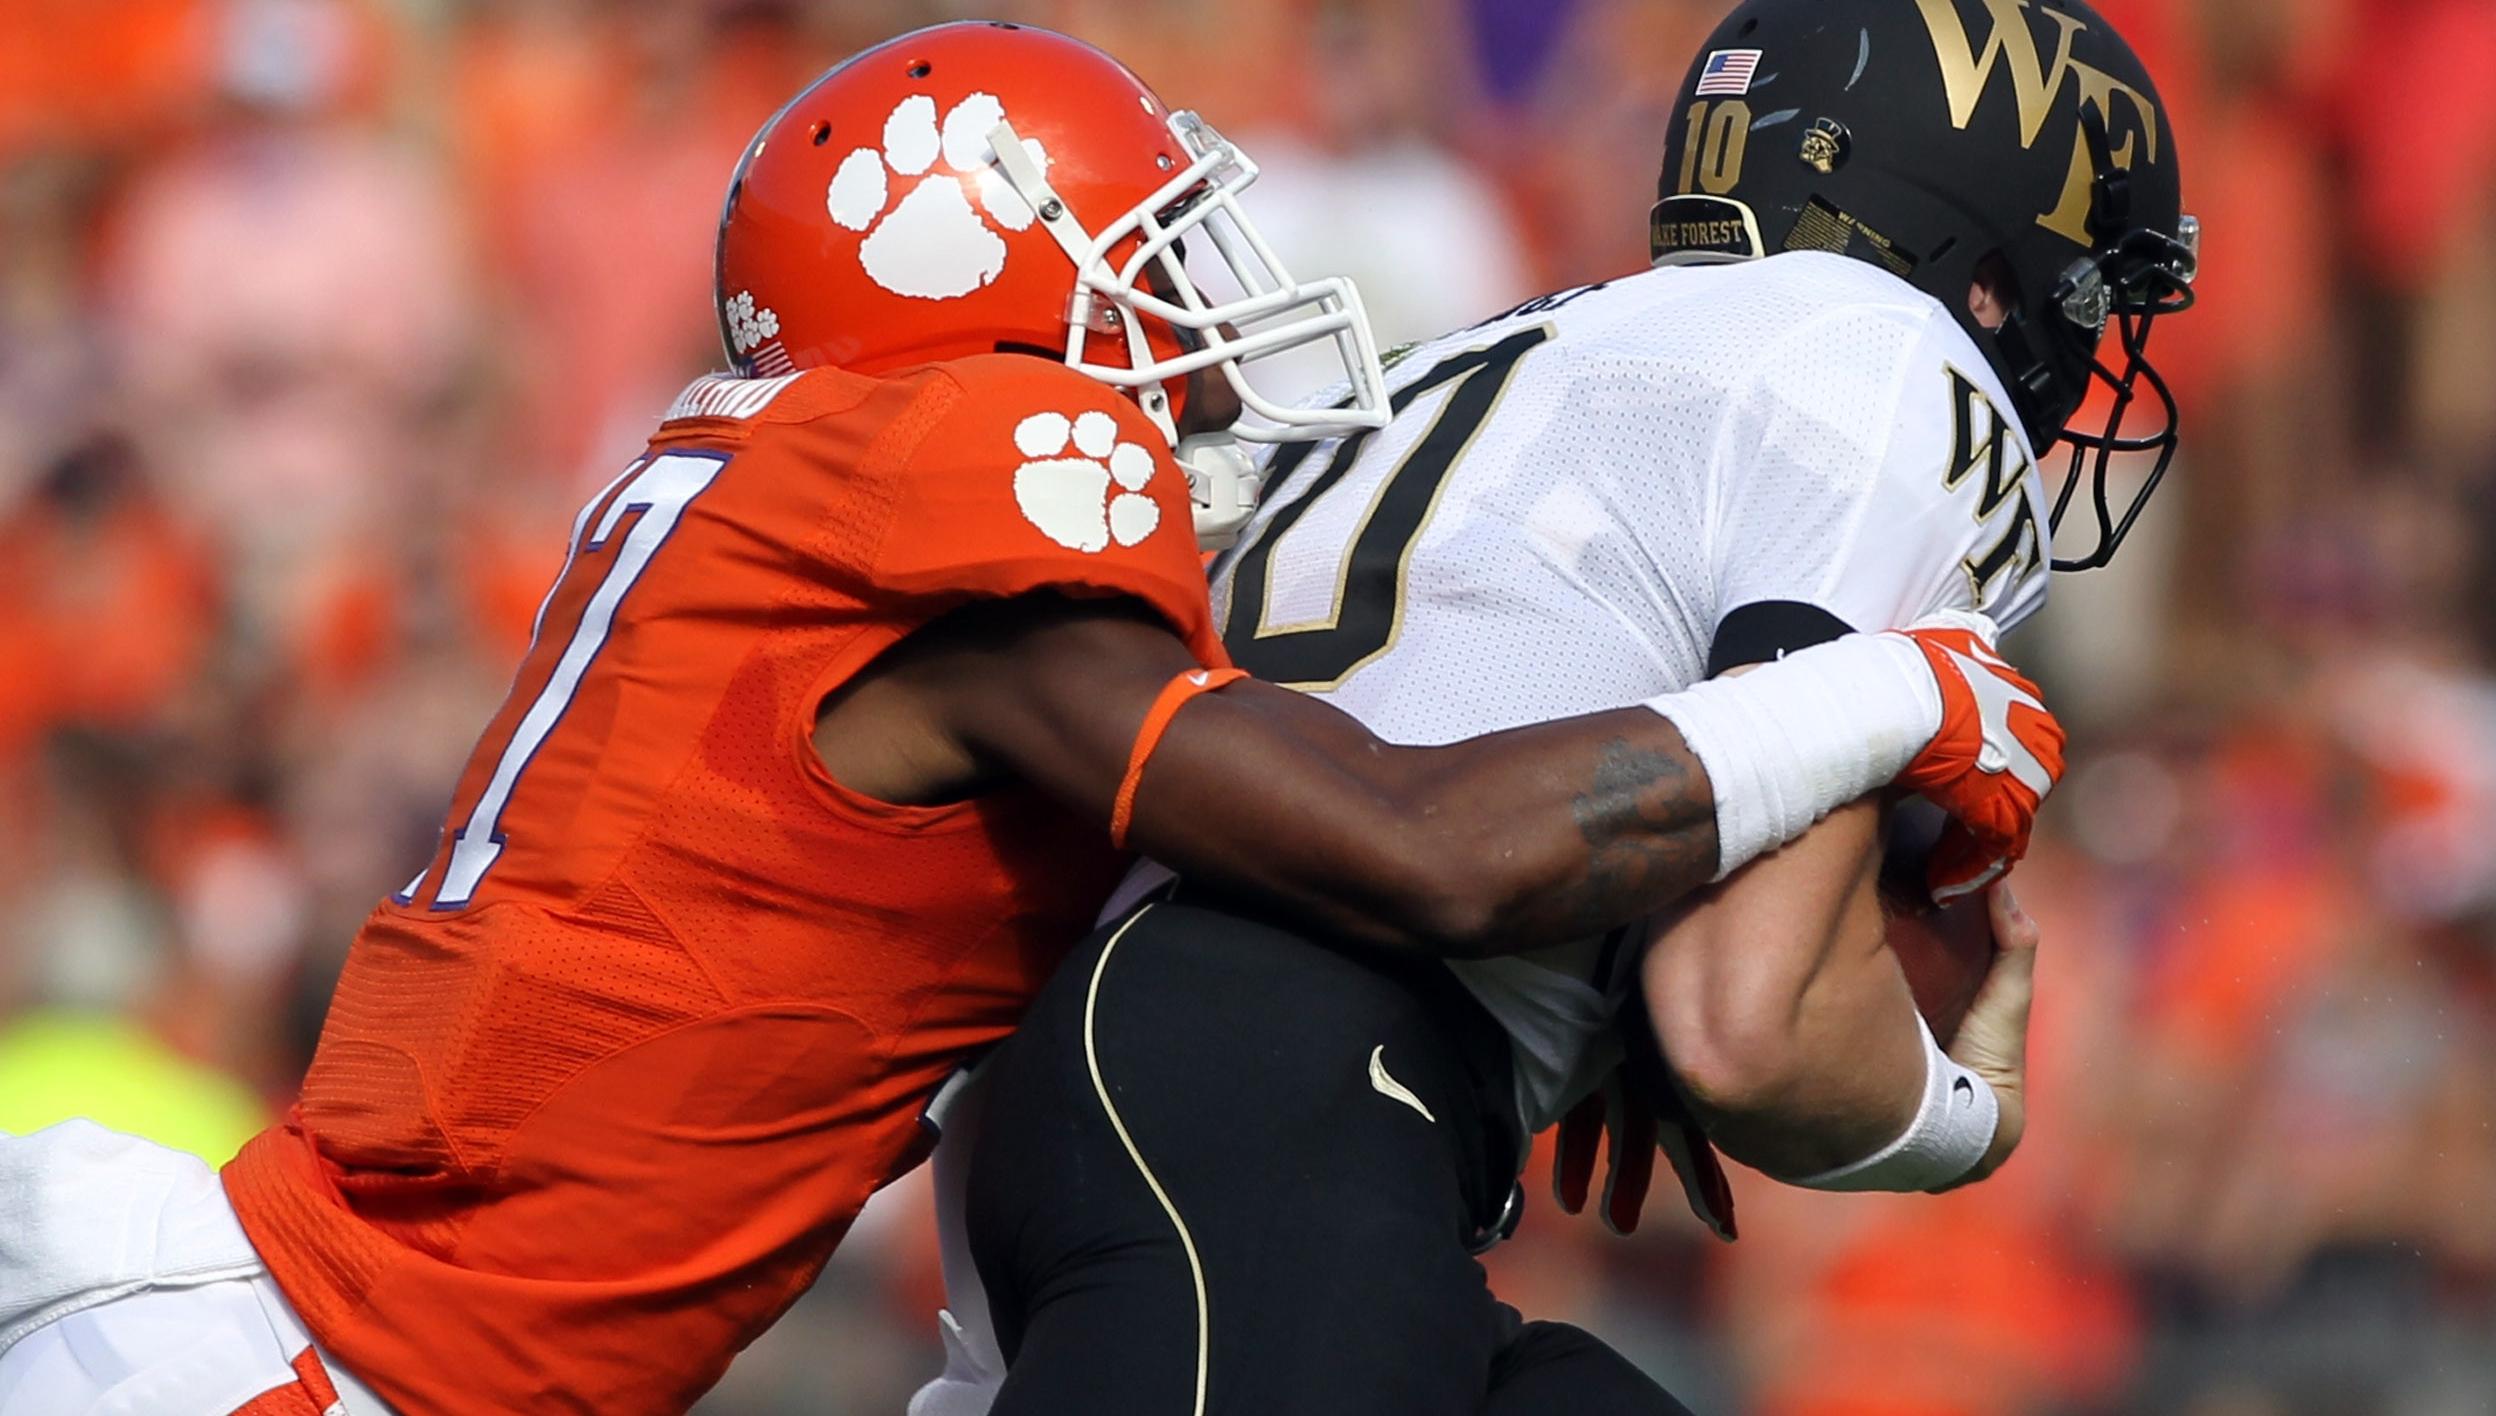 Clemson vs. Wake Forest Game Replay Now Available on ClemsonTigers.com